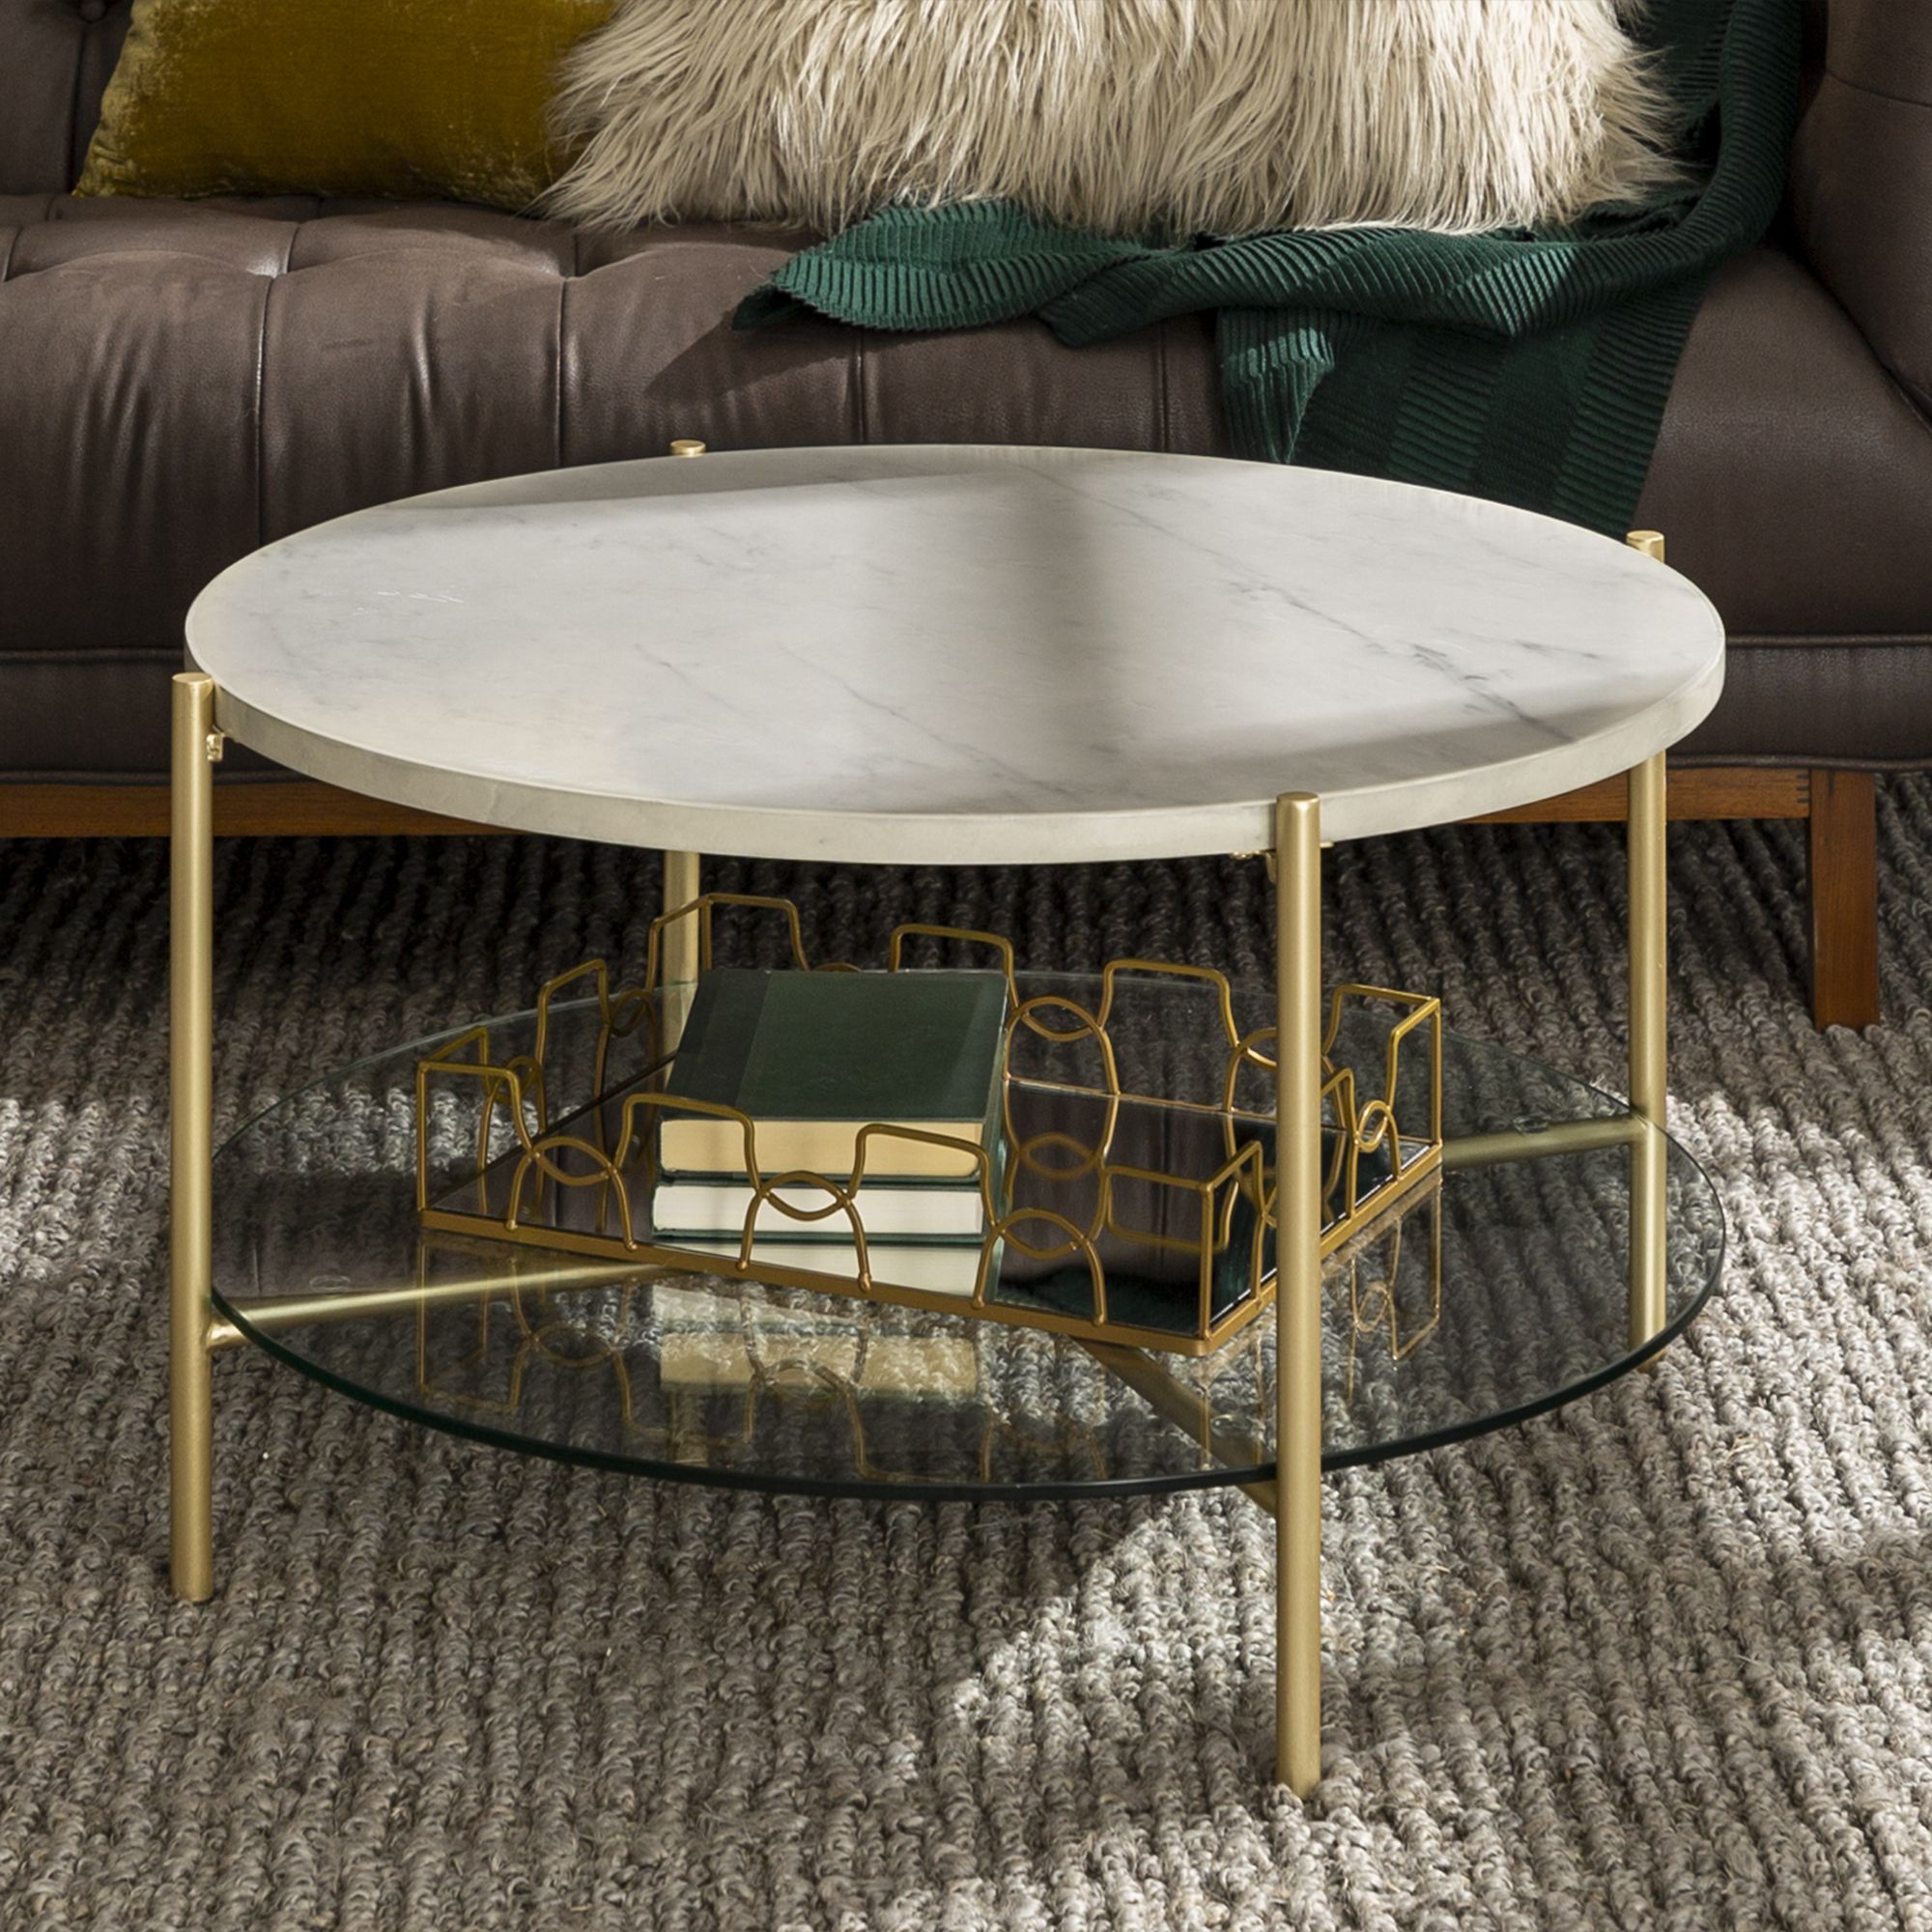 Manor Park Mid Century Round Coffee Table, White Marble Intended For White Stone Coffee Tables (View 8 of 15)